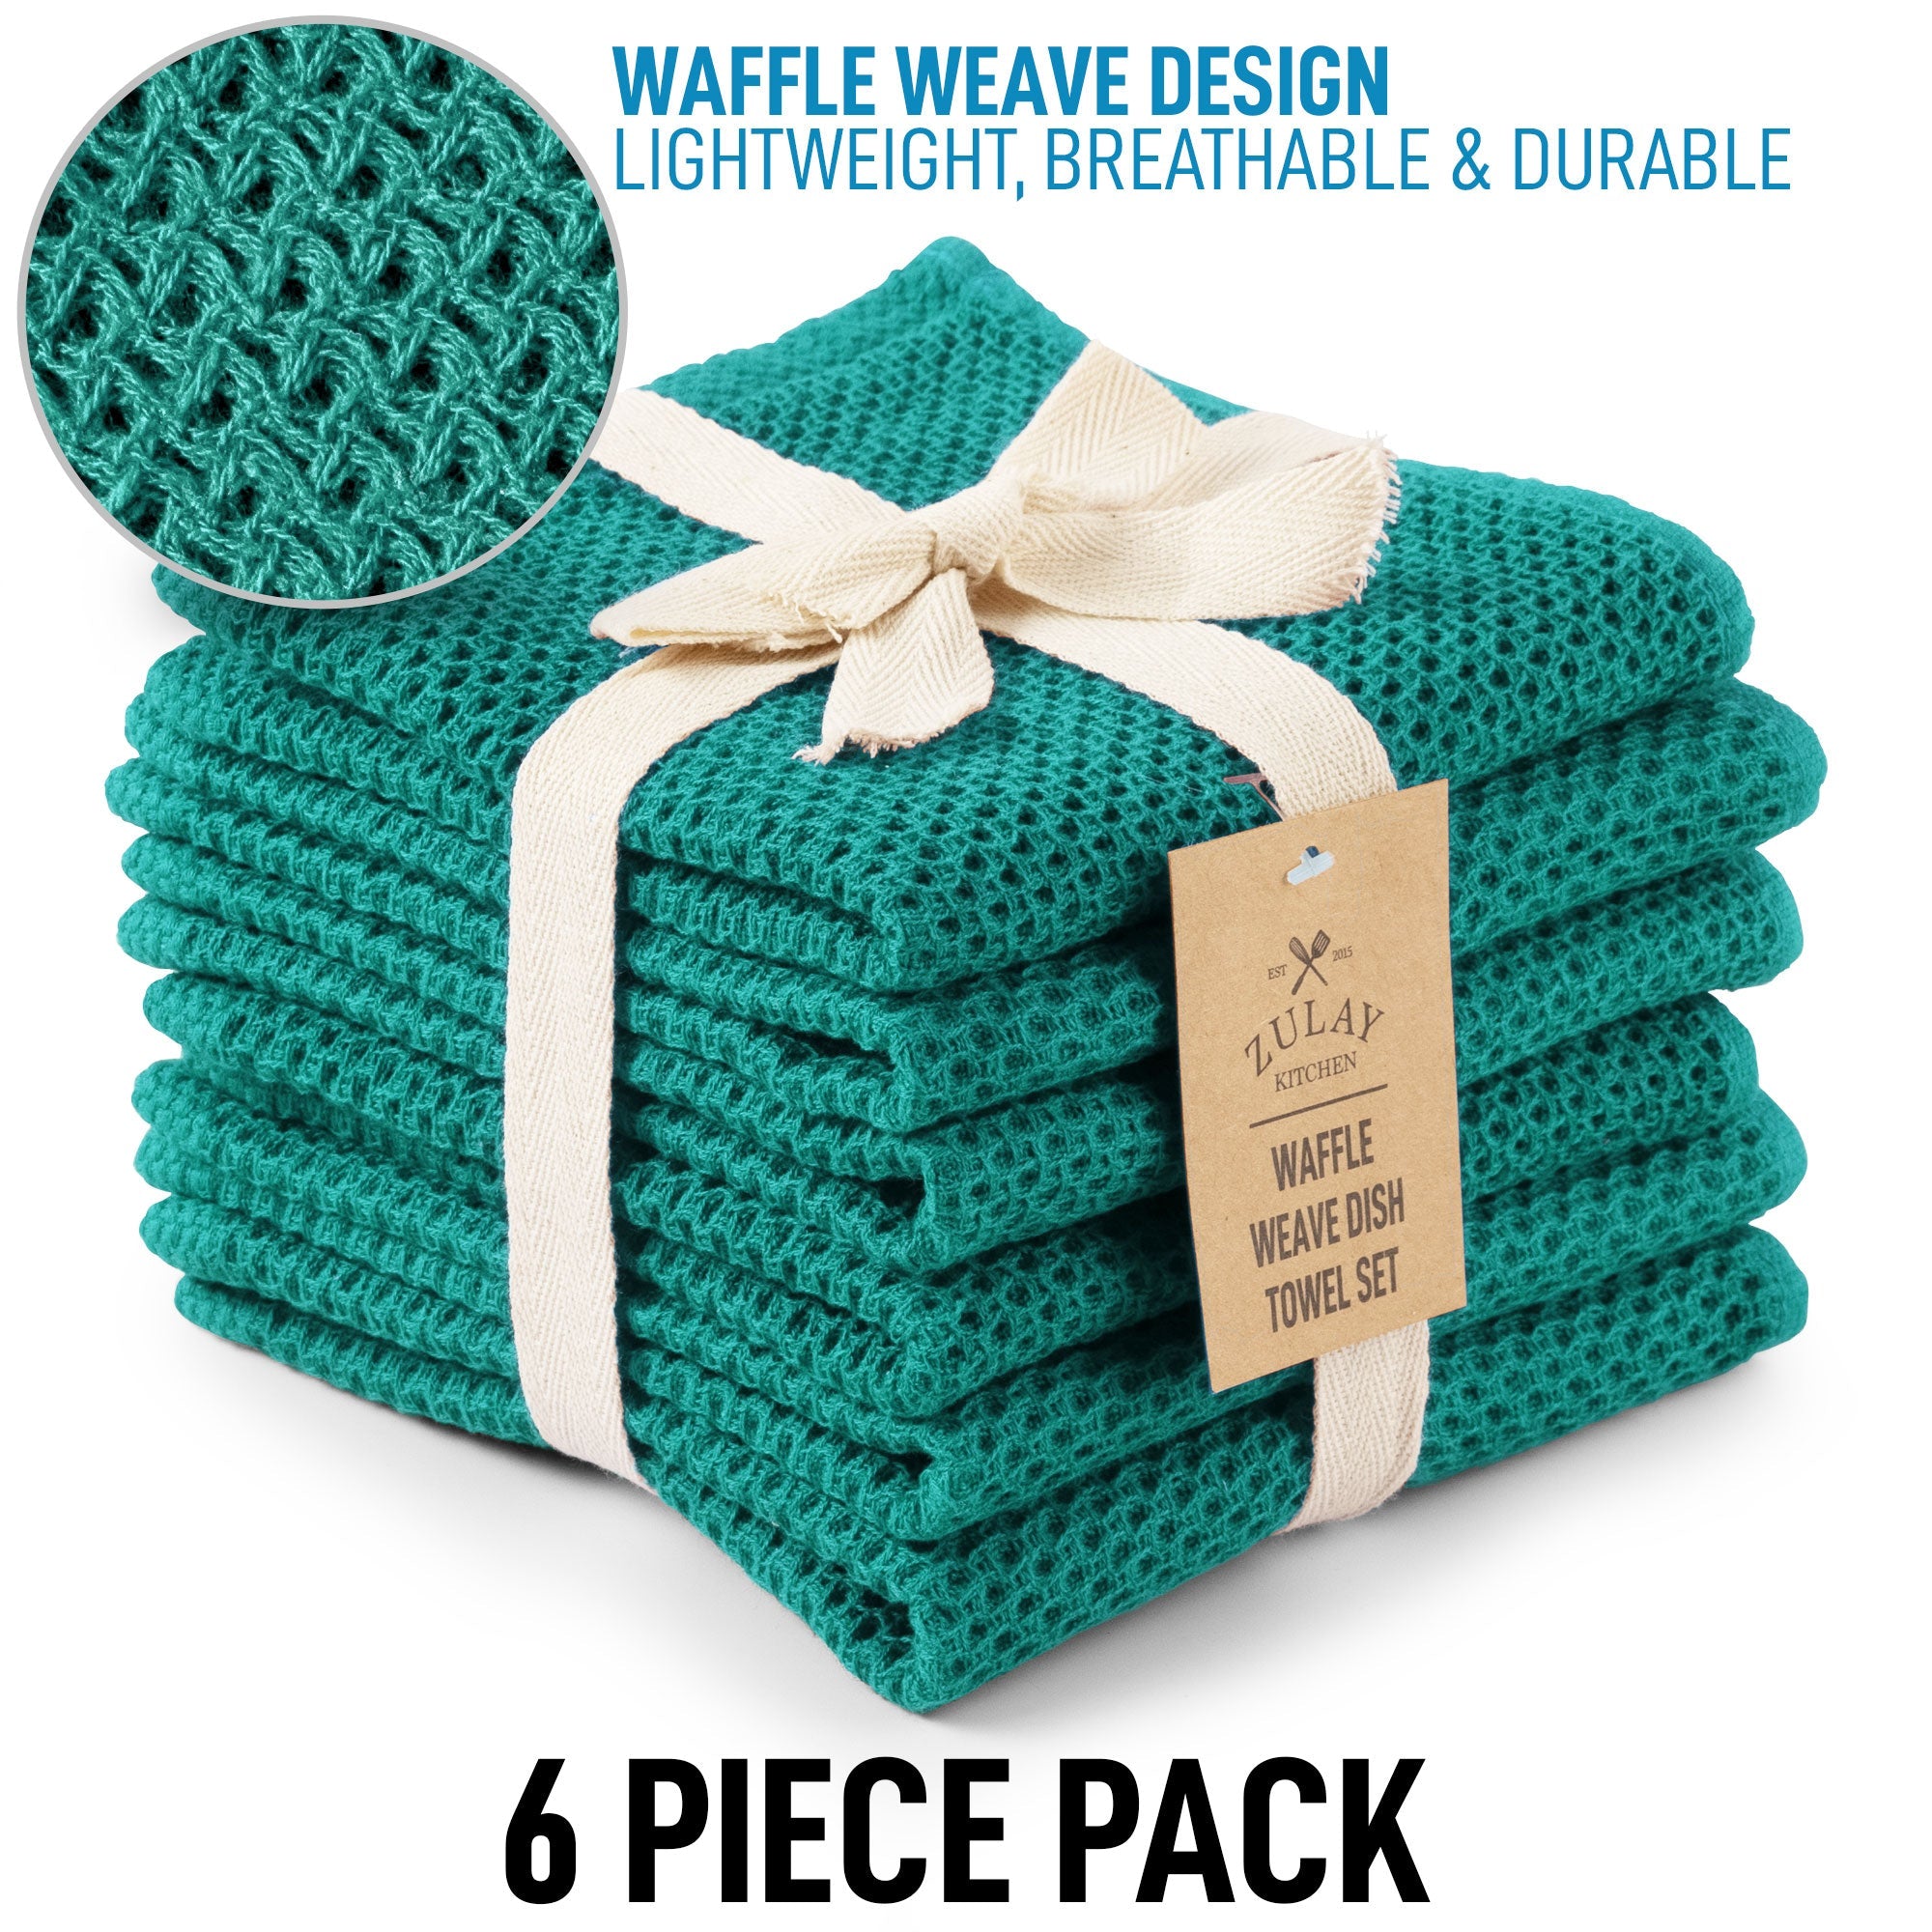 Zulay Kitchen Waffle Weave Kitchen Towels - 3 Pack 12 x 12 inch